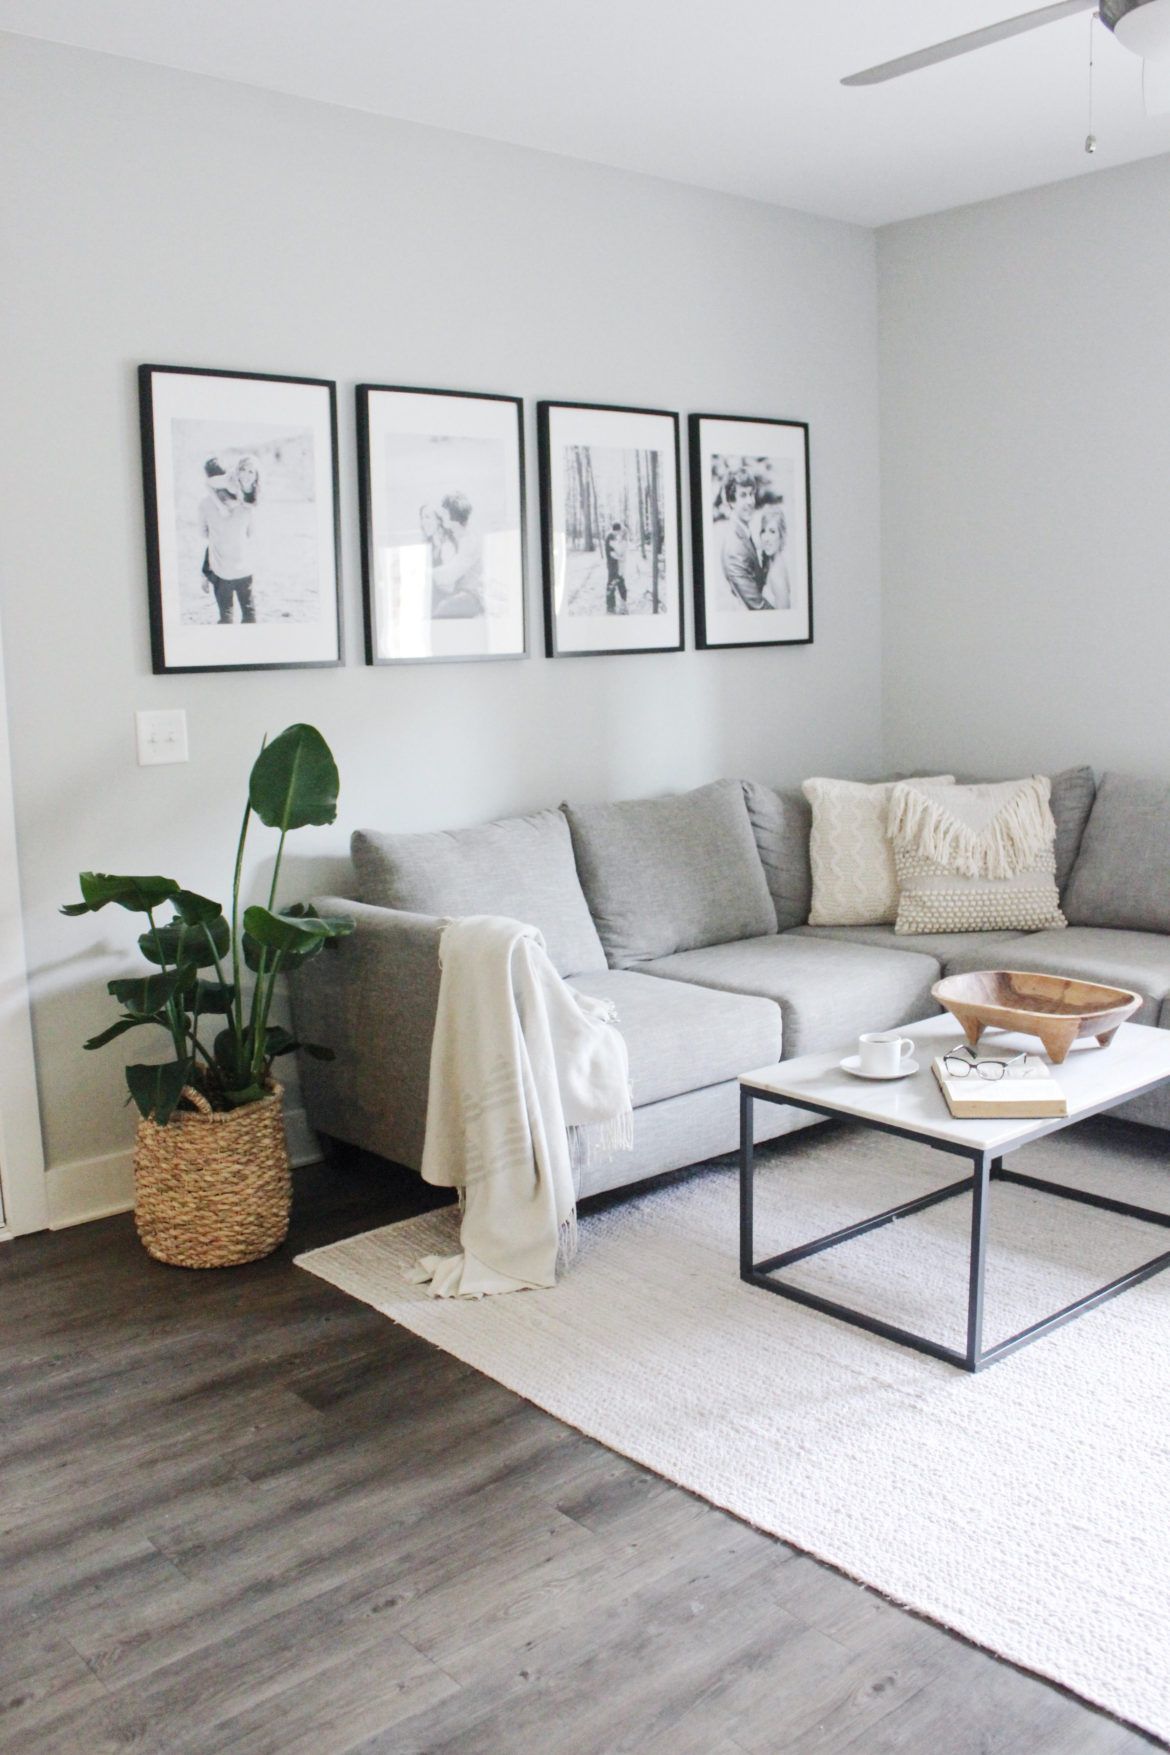 Minimalist Interiors For Small Spaces